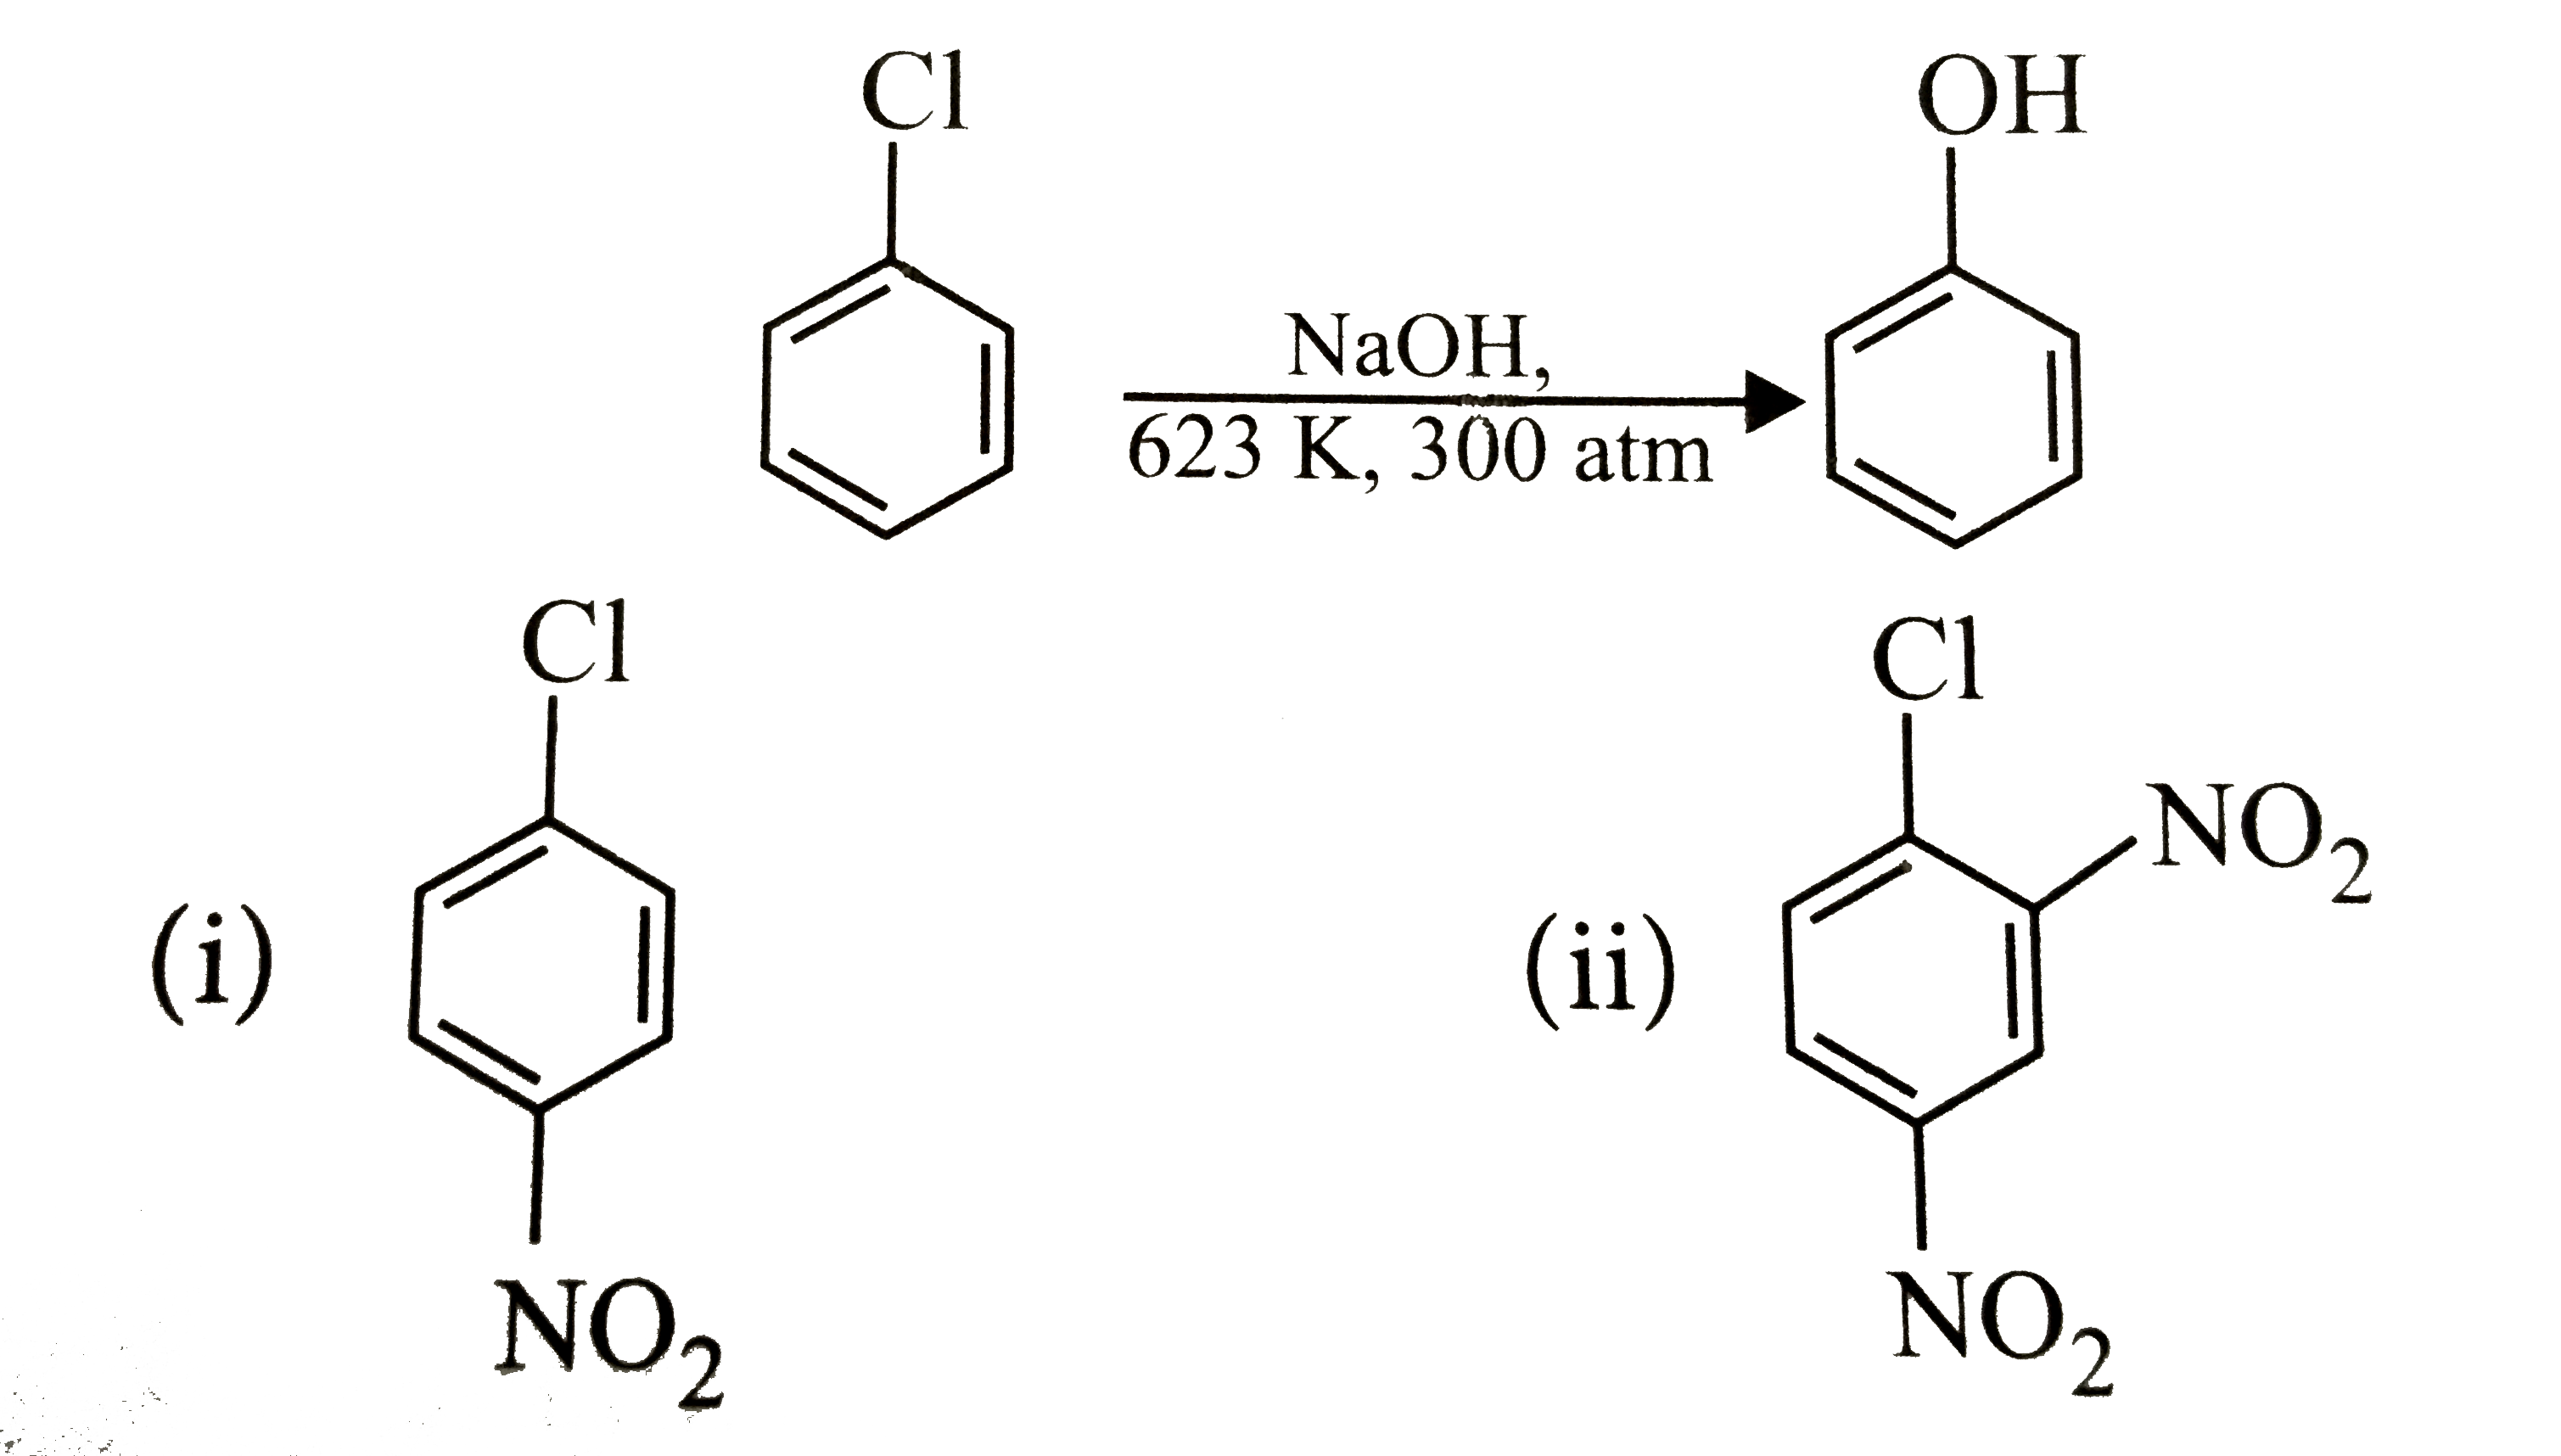 Chlorobenzene can be converted into phenol by  heating in aqueous sodium hydroxide solution at temperature of 623K and a pressure of 300atm. However the rate of reaction can be increased by presence of certain groups in benzene ring. What will be the order of reactivity of following compounds towards the above substitution reaction?